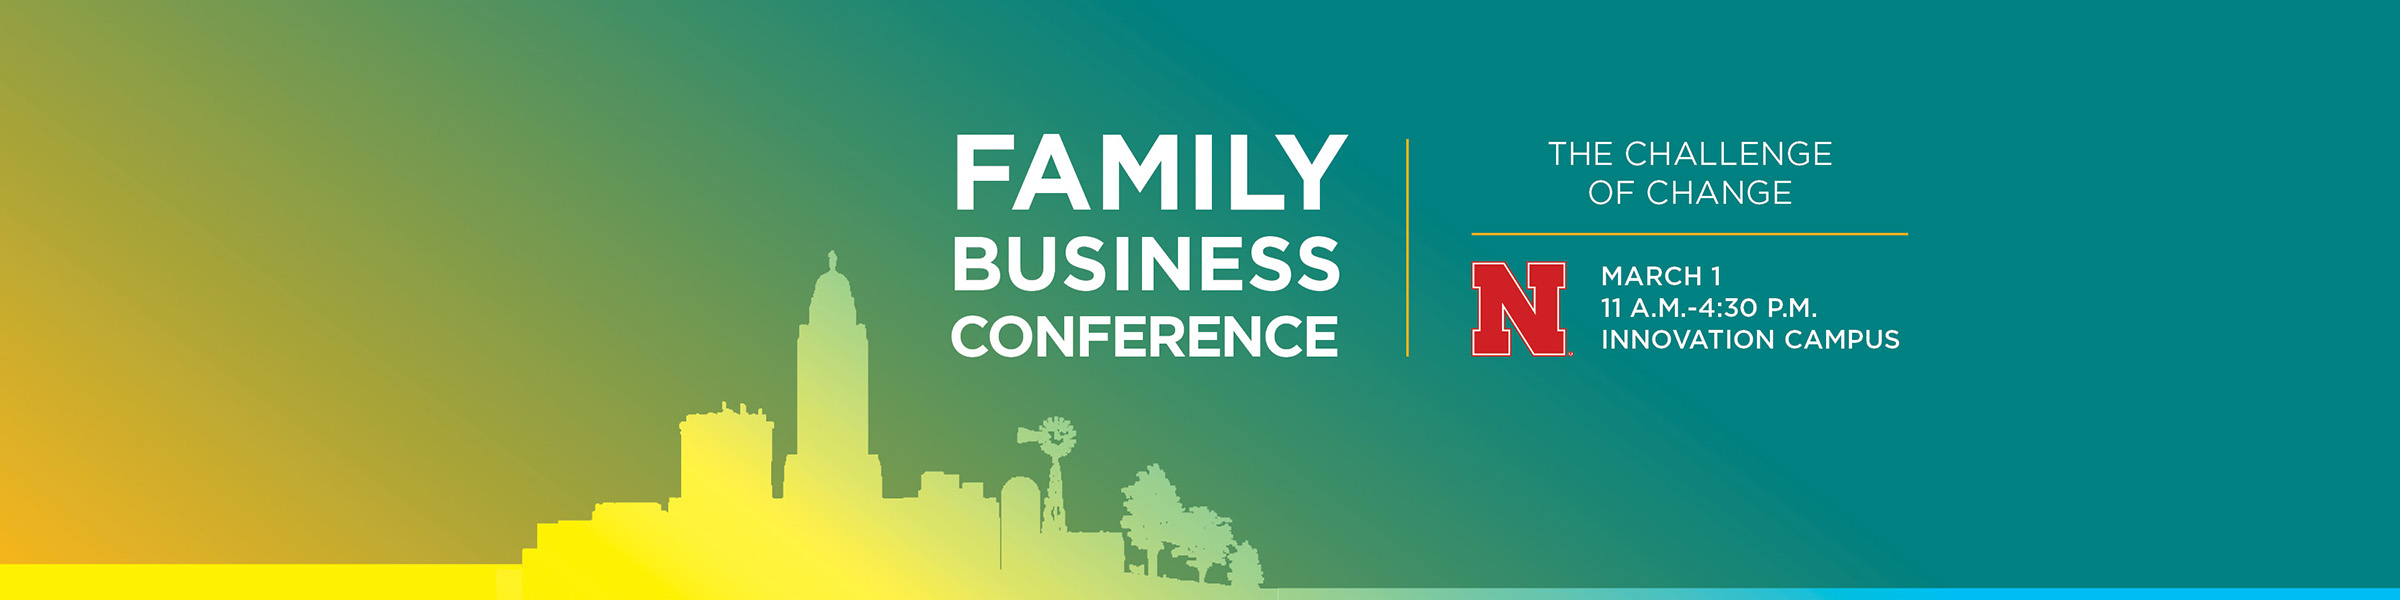 Family Business Conference - The Challenge of Change